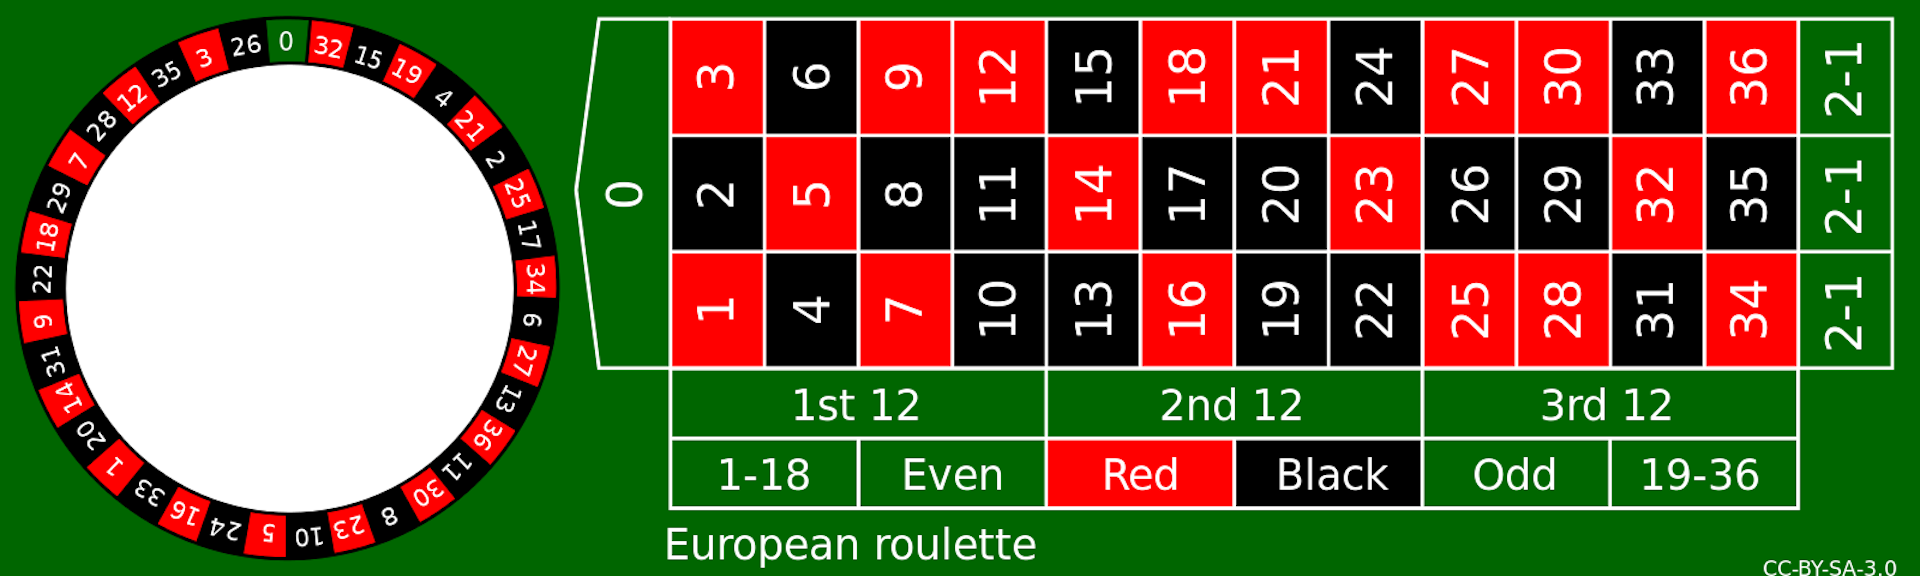 American Roulette Payout Chart